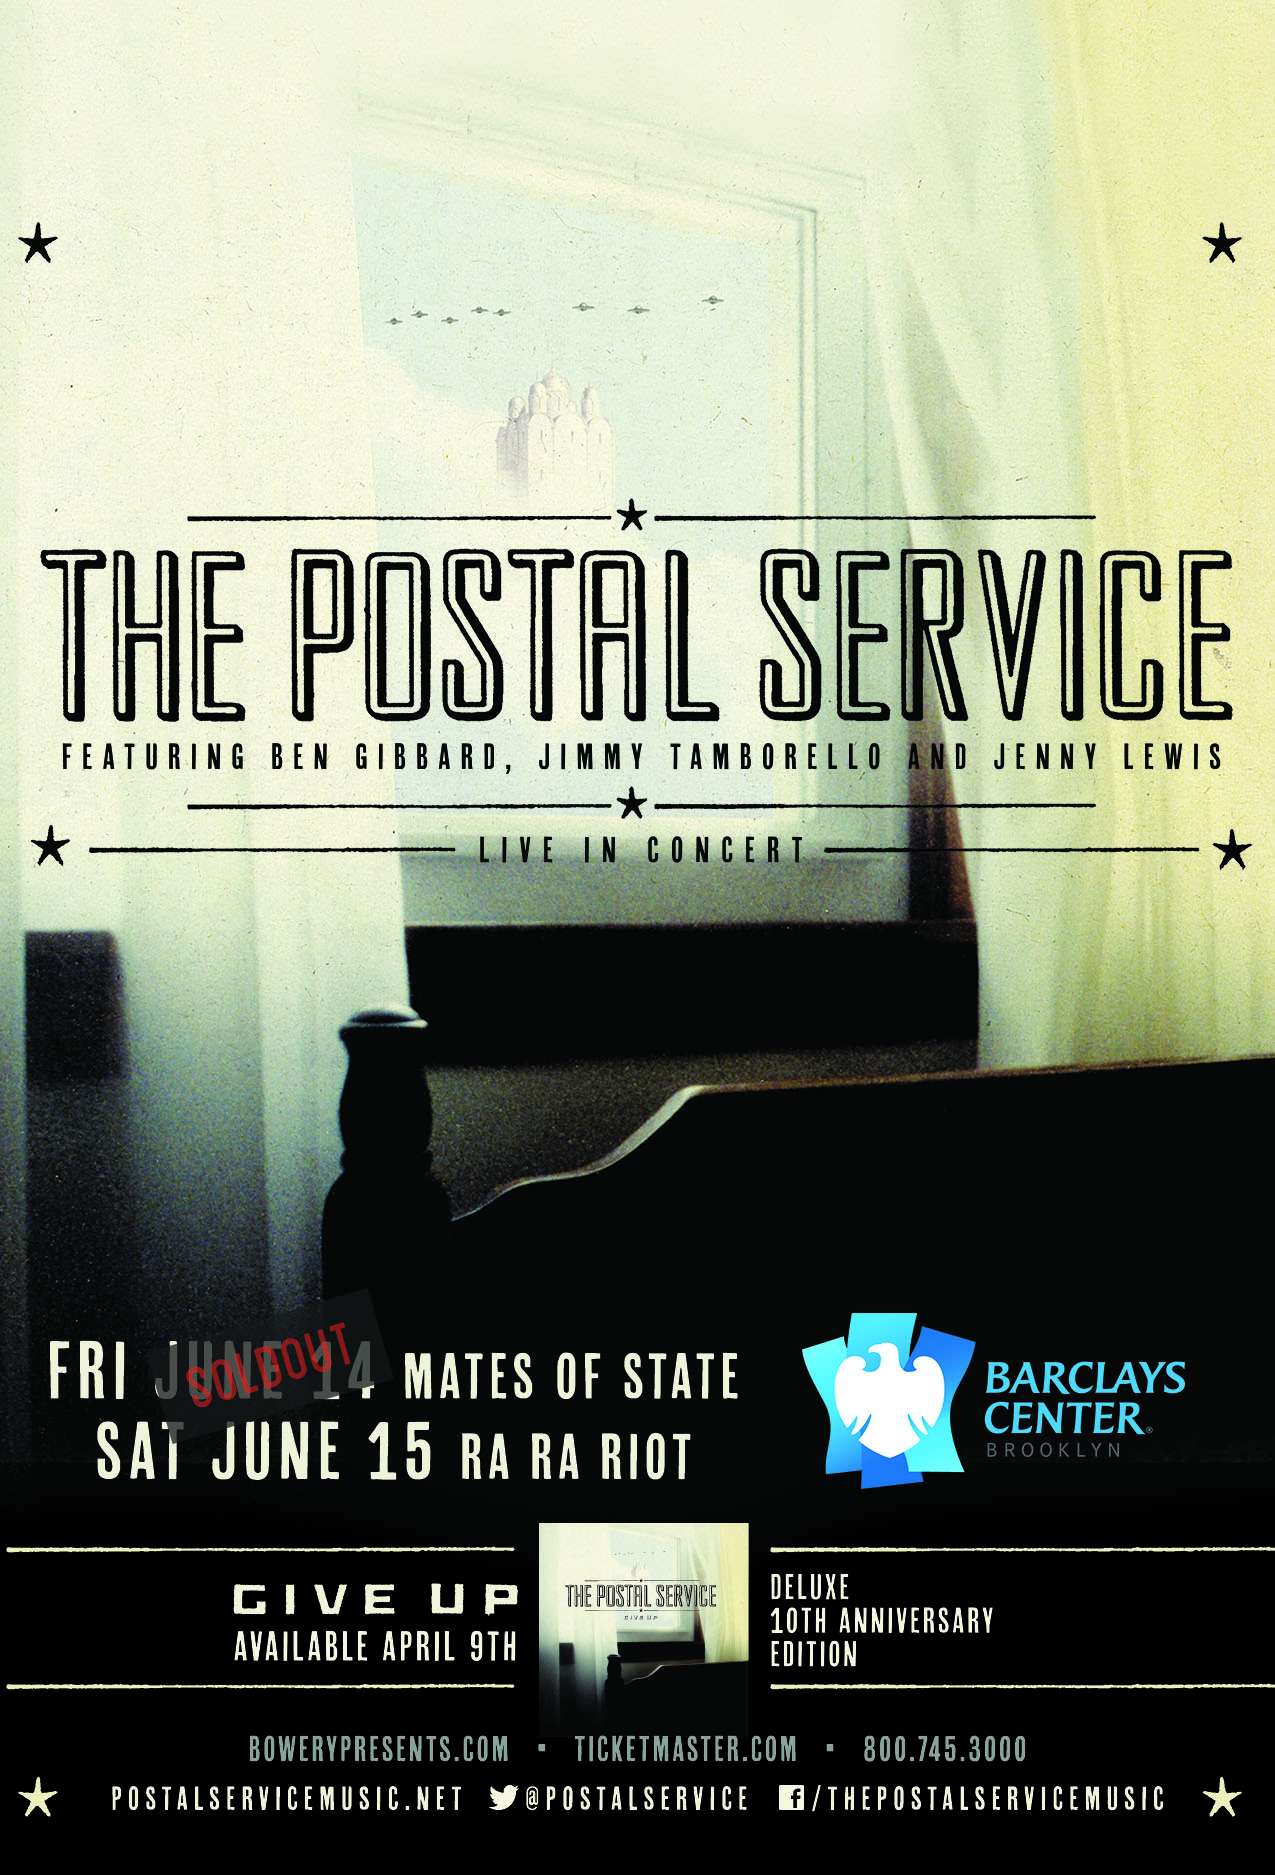 Win Tickets to See The Postal Service at NYC’s Barclays Center